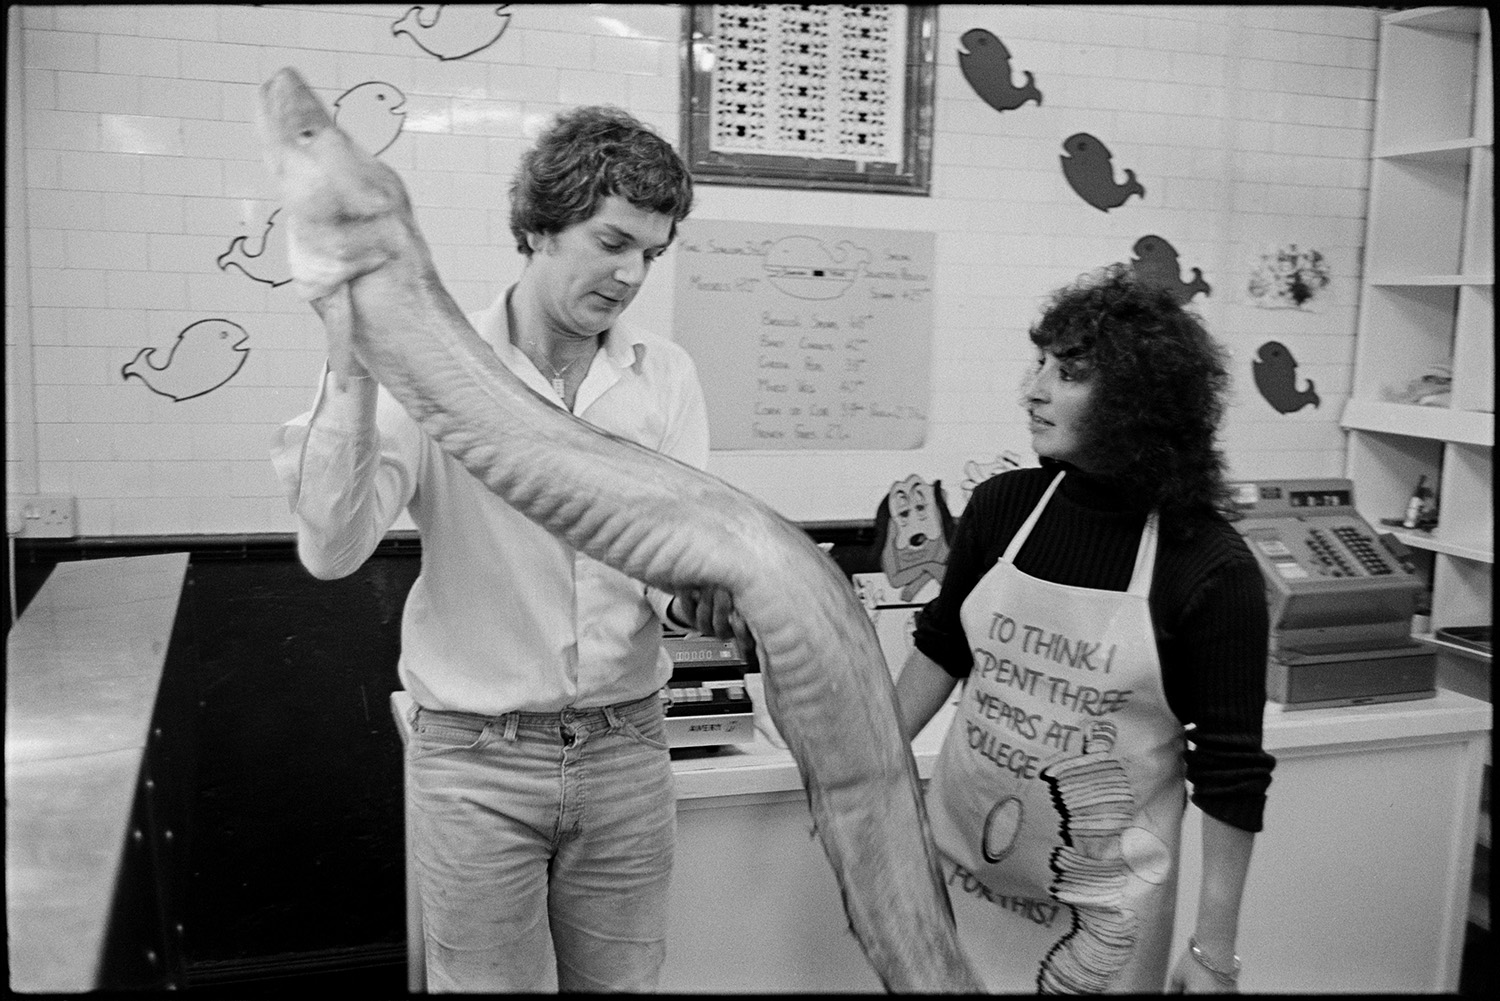 Fishmongers with giant conger eel ?? in shop. 
[A man in a fishmonger's shop in Allhaland Street, Bideford showing a giant conger eel to a woman wearing an apron with the wording 'To think I spent three years at college for this!']